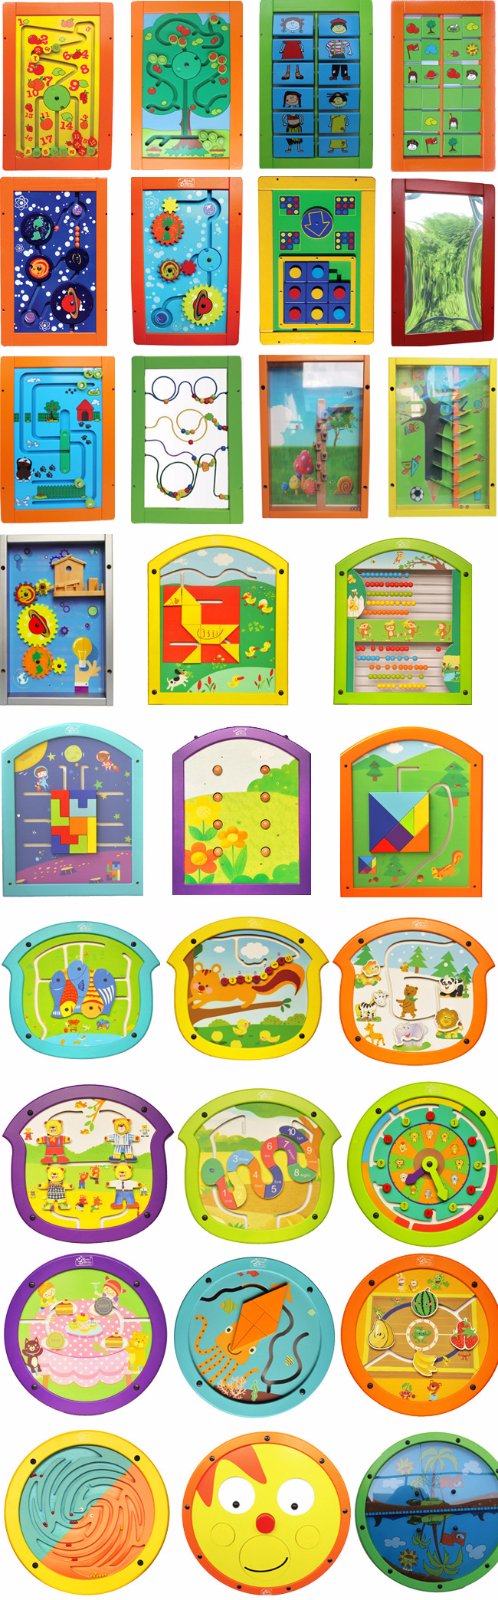 Educational Play Board Mounted on Wall for Children